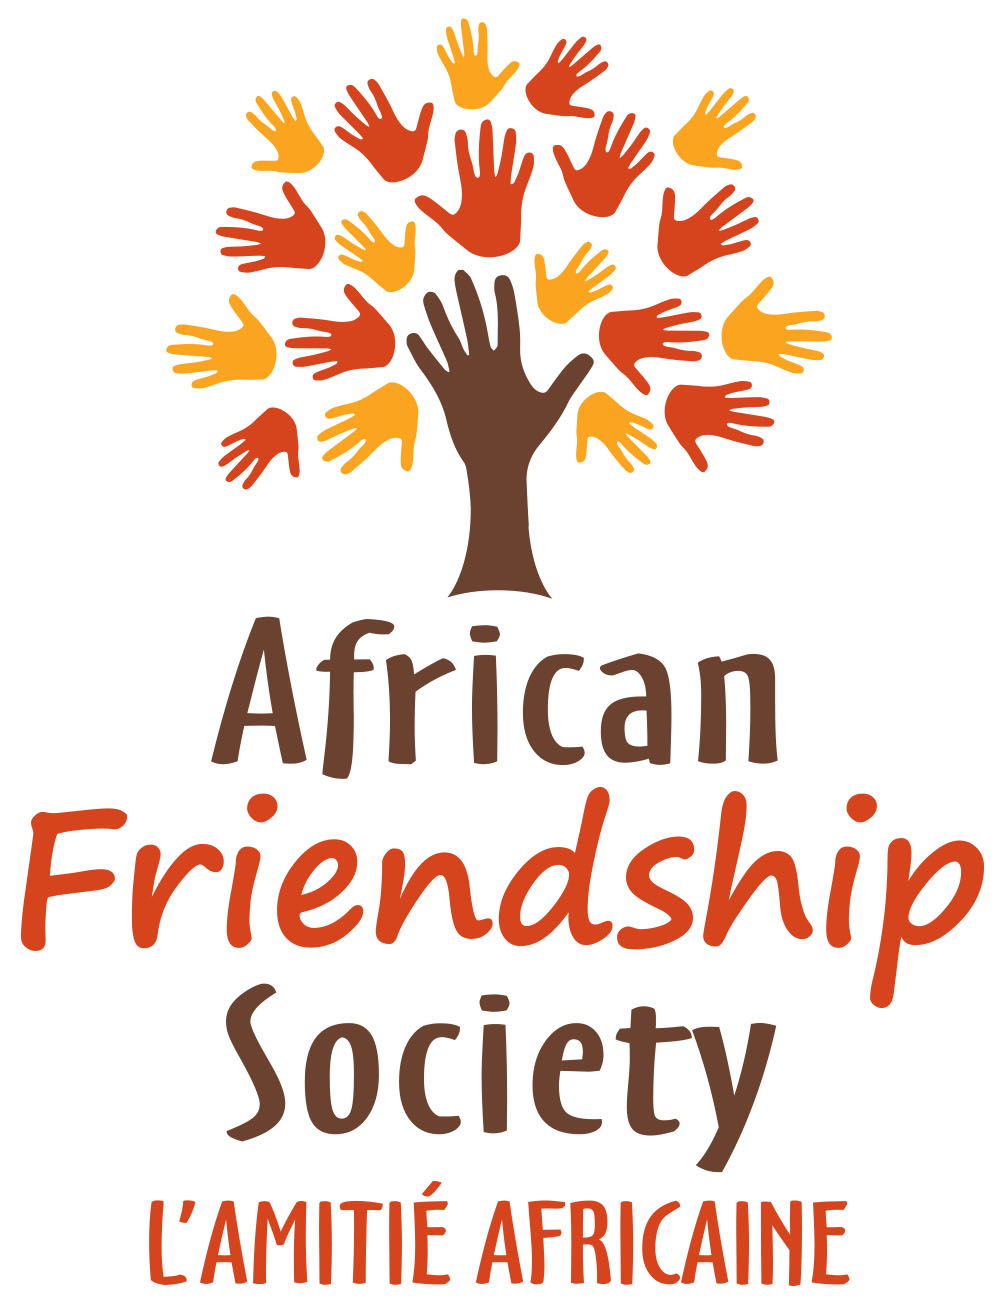 The African Friendship Society Logo